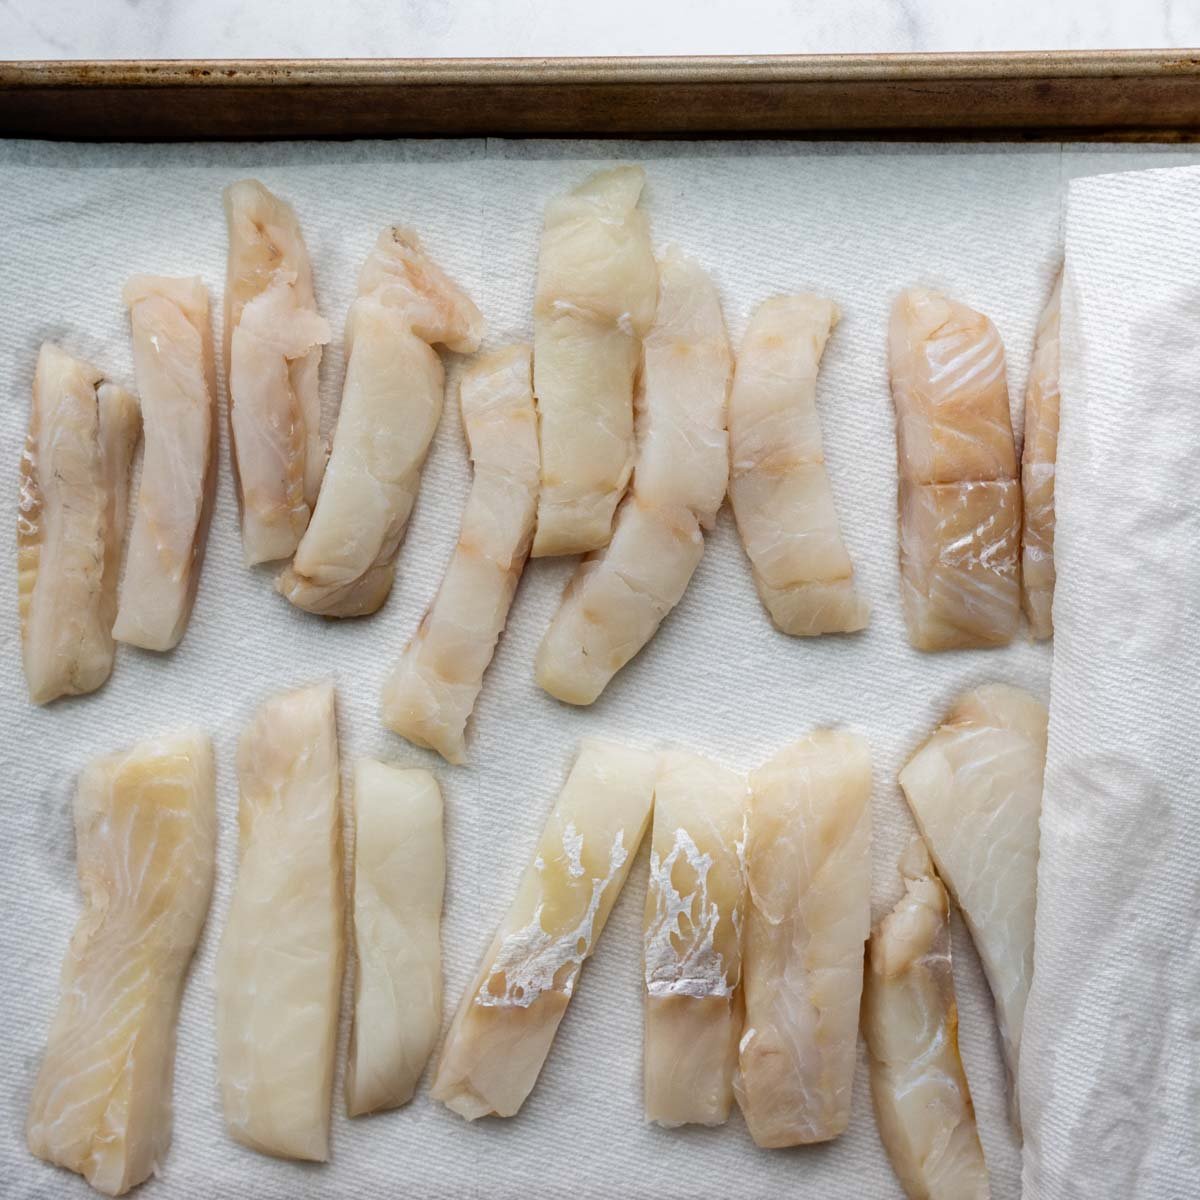 cut fish on a baking sheet lined with paper towels.